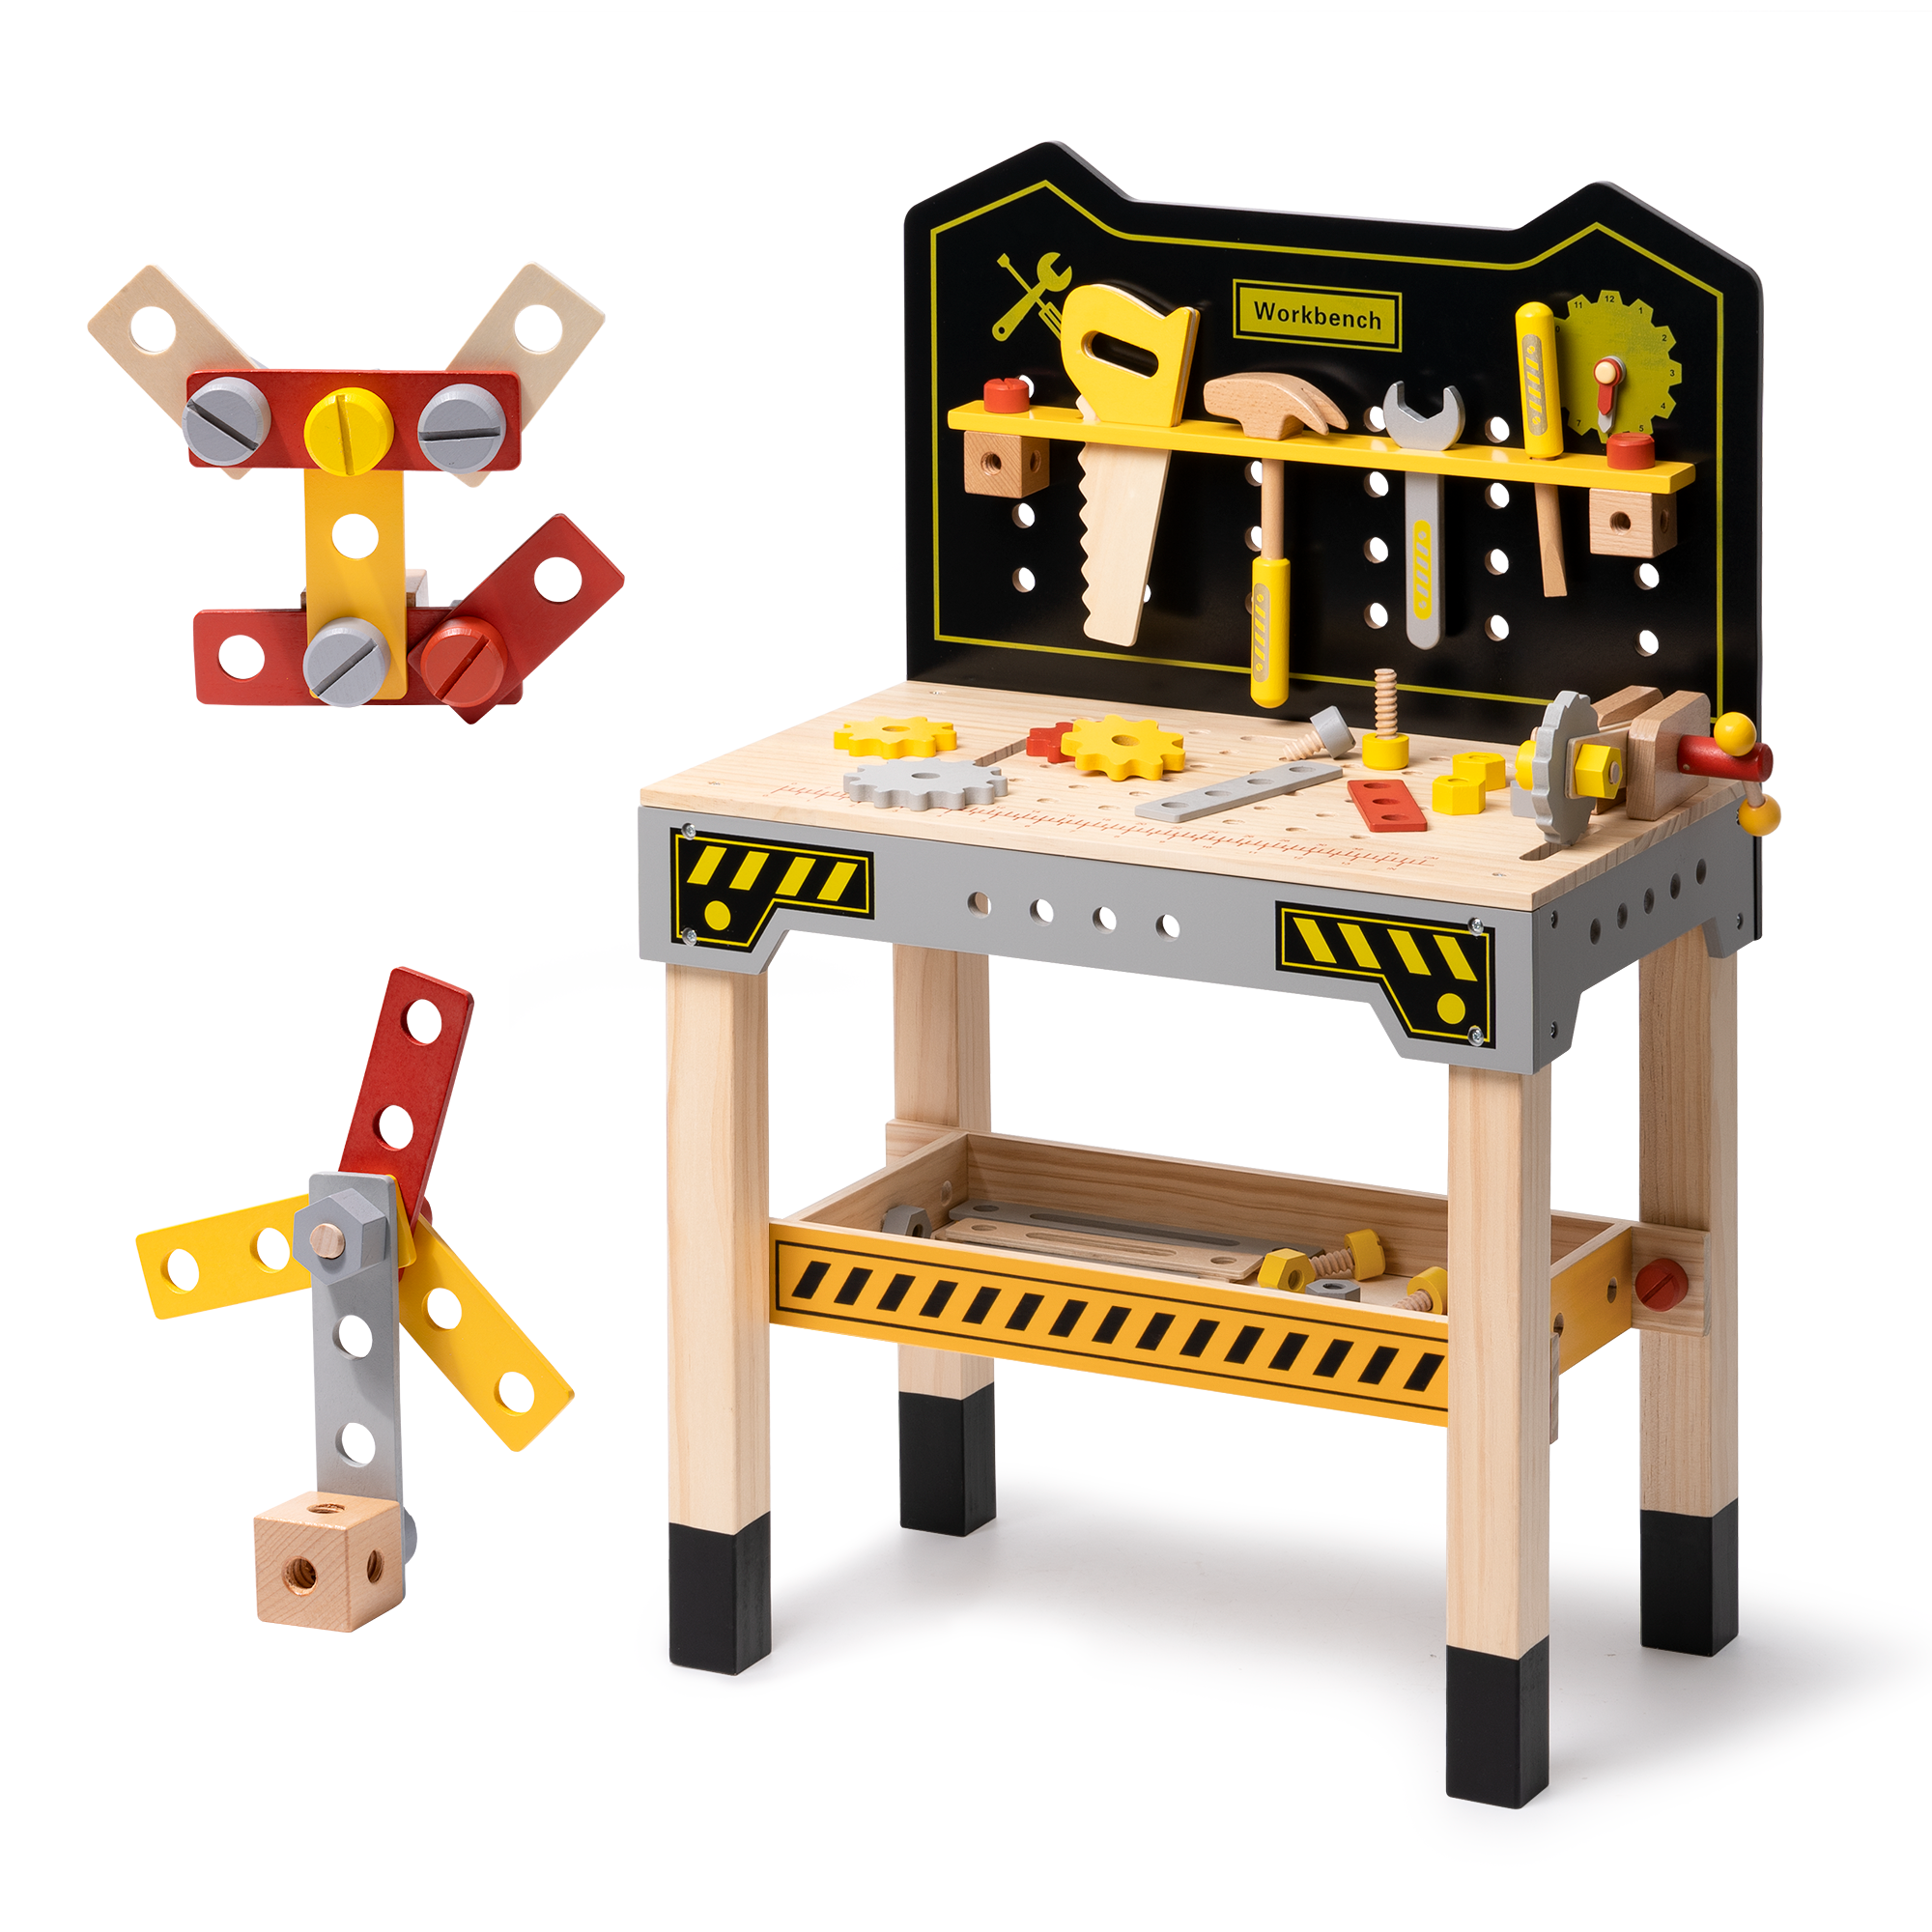 Classic Wooden Workbench for Kids, Great Gift for